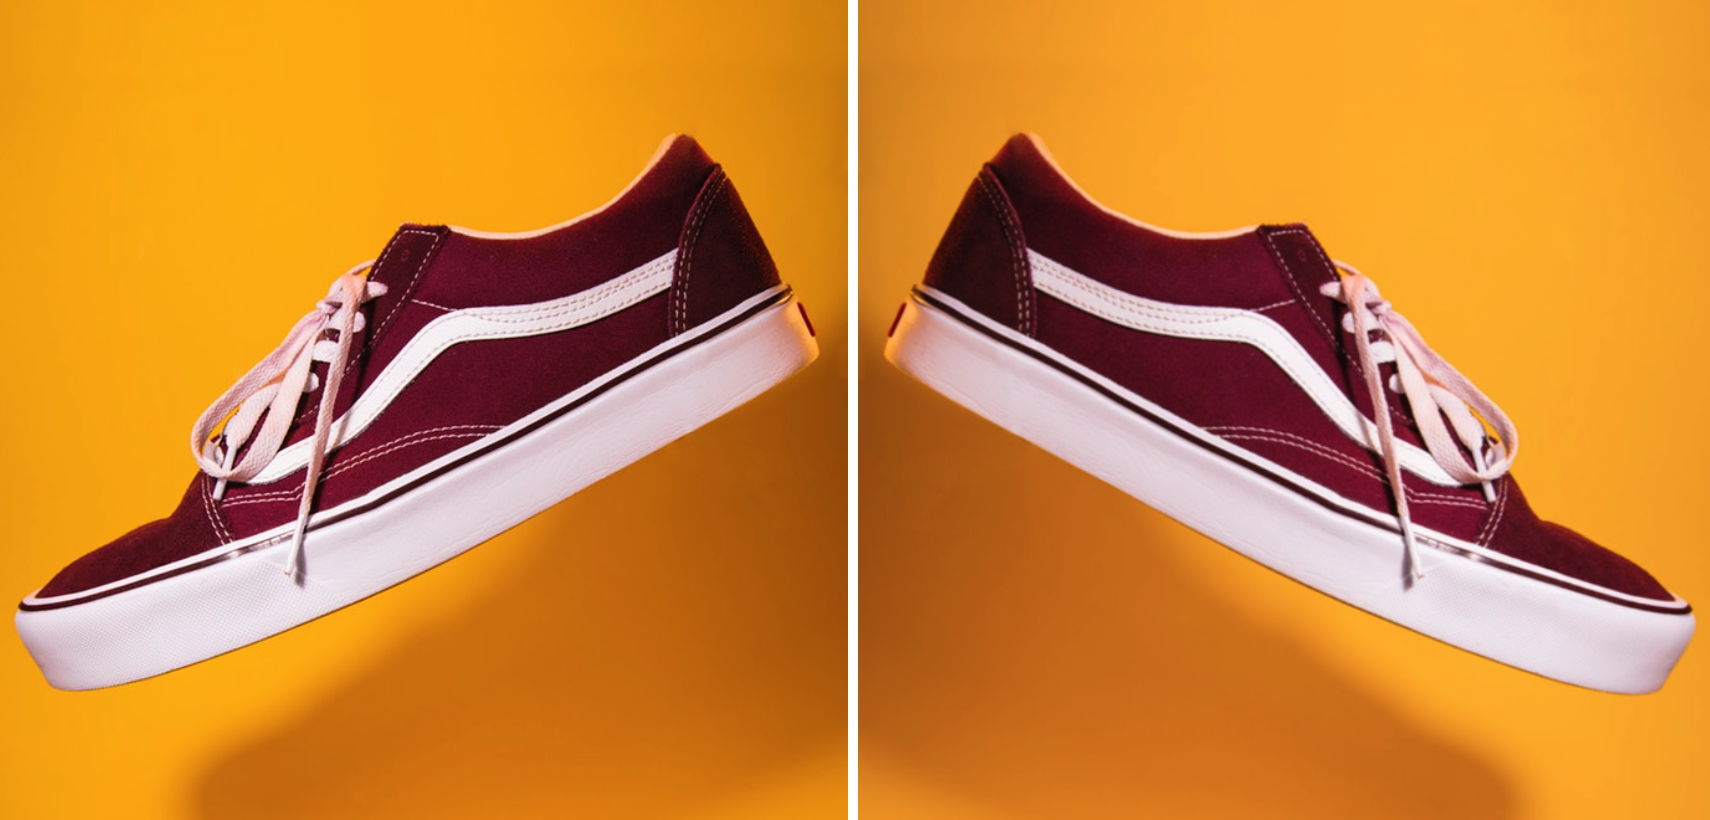 vertaling Bedreven duizend Vans is Suing Primark for Selling "Intentional Copies" of its Sneakers -  The Fashion Law